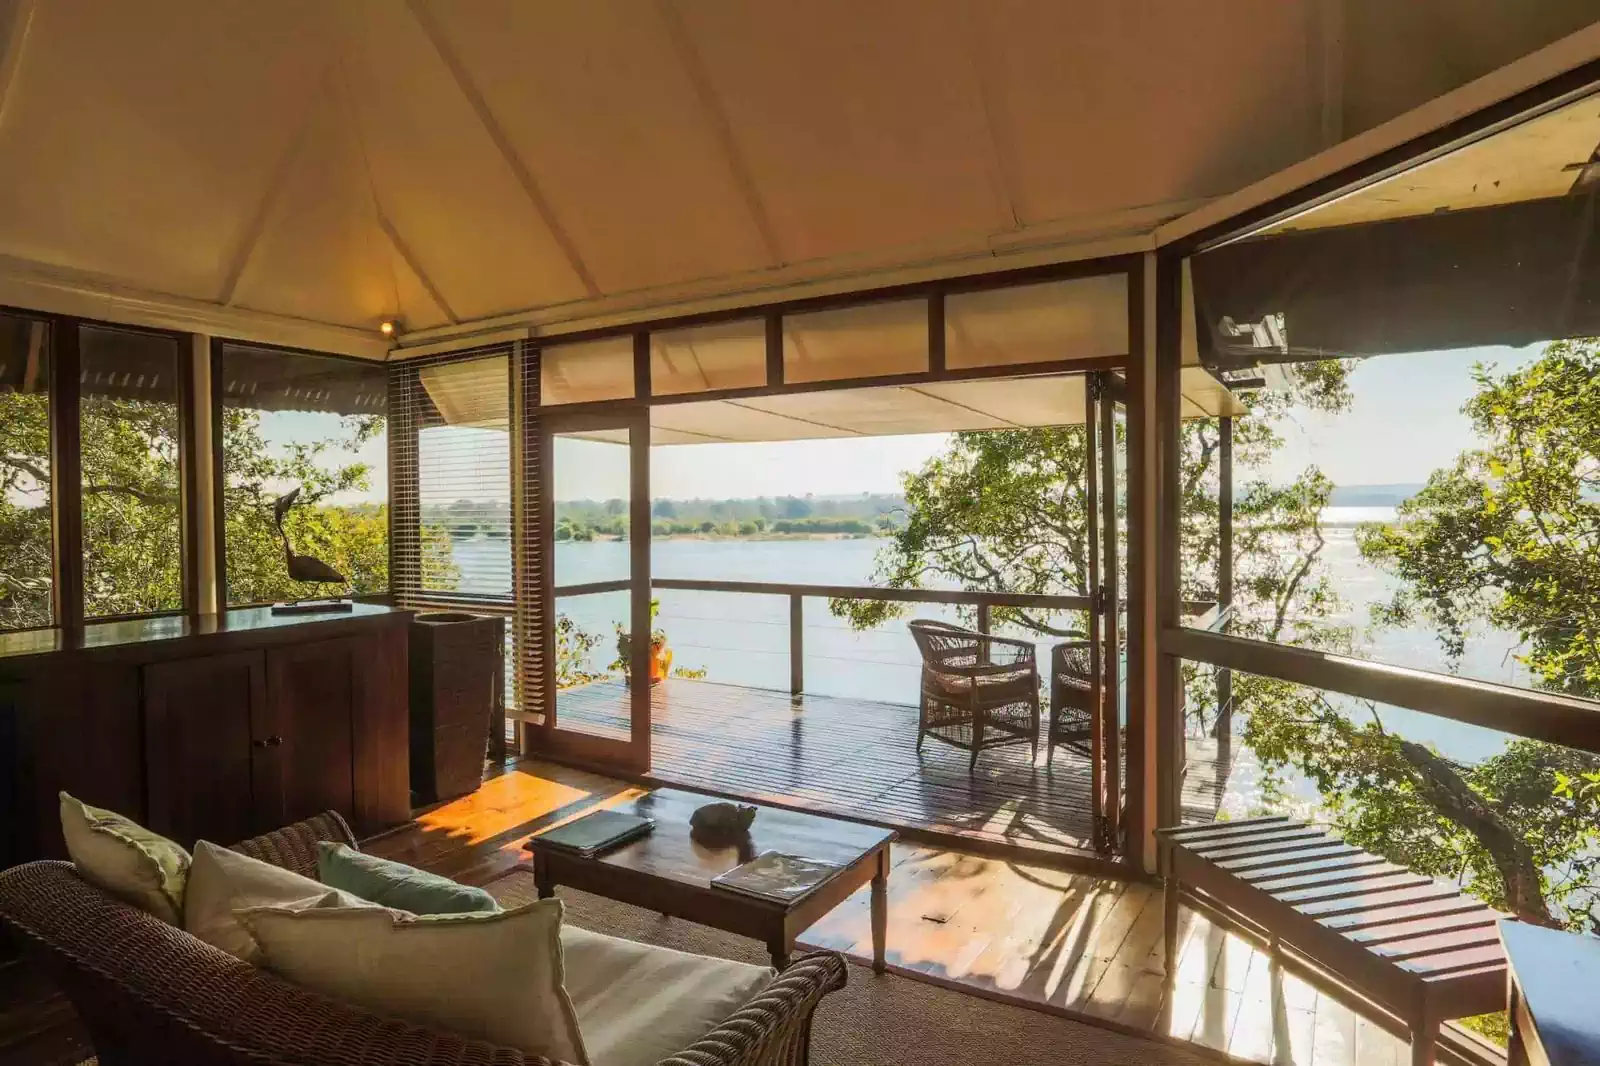 Interior of lounge overlooking river in River Club lodge in Livingstone